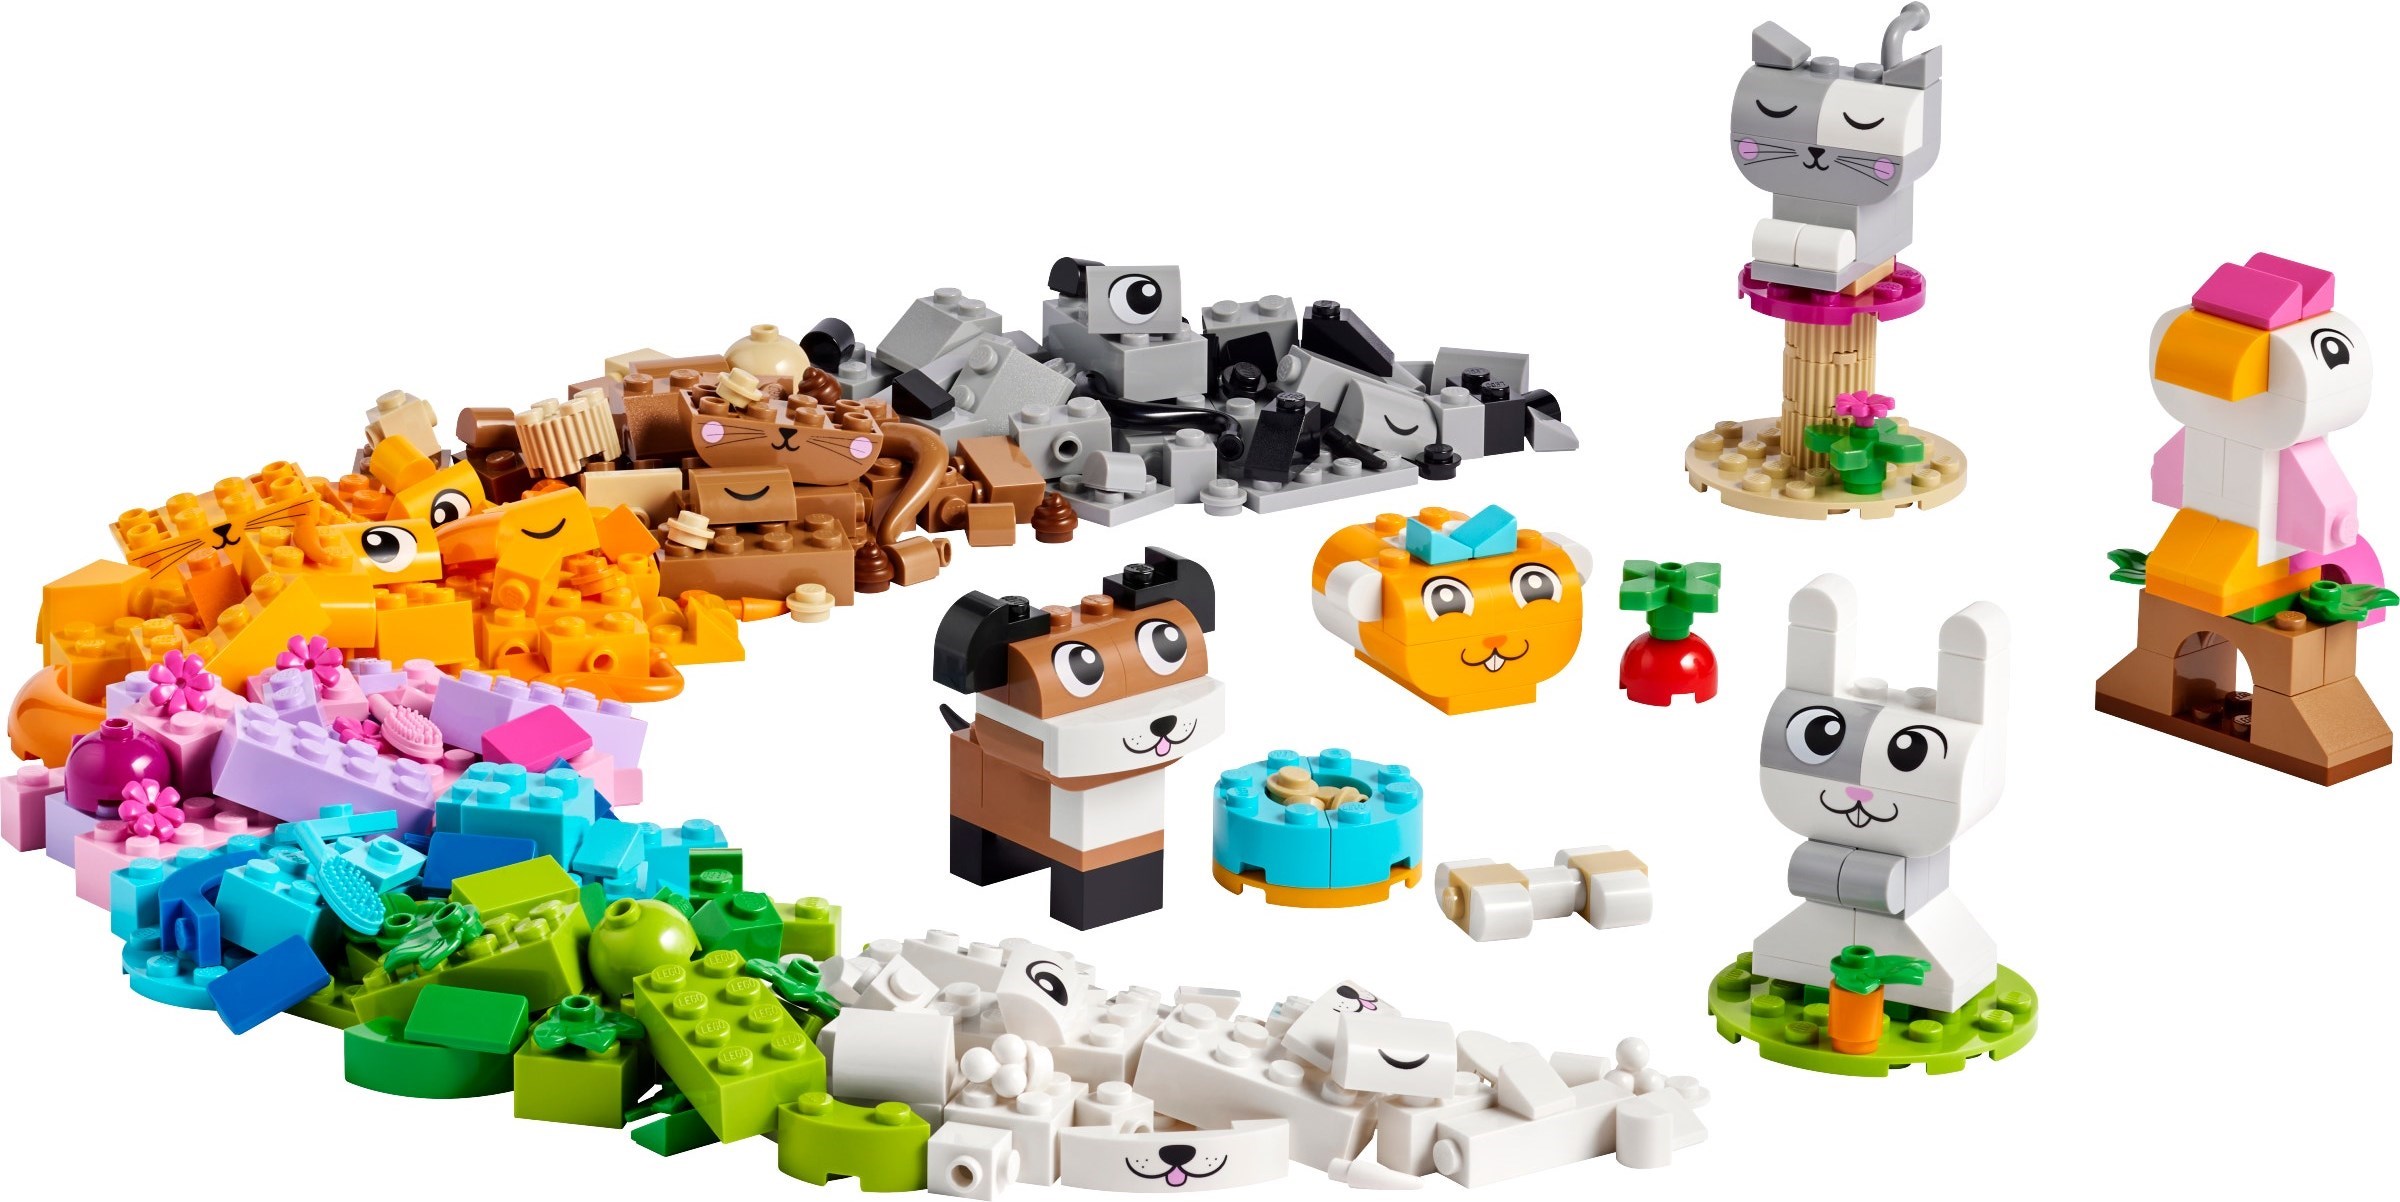 More LEGO Classic sets may be launching in early 2024